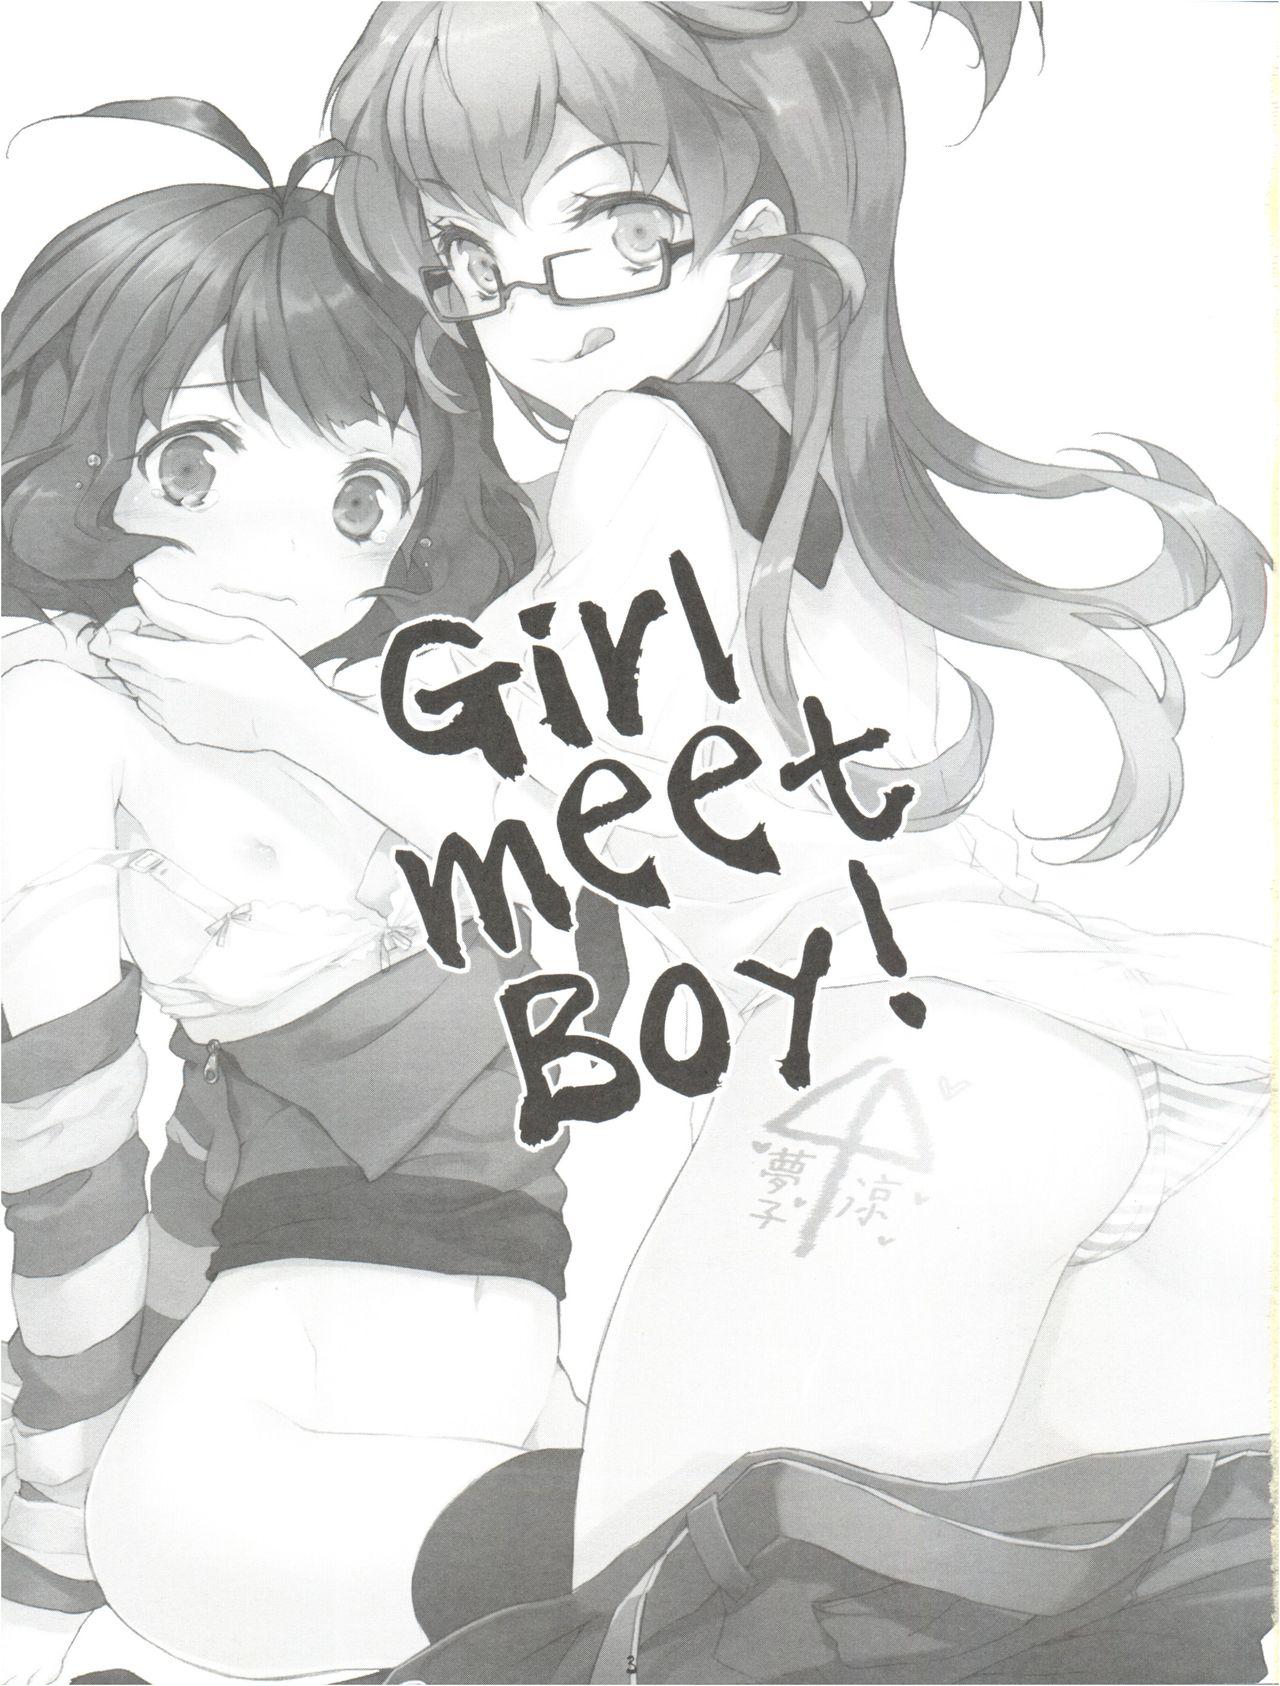 Hot Cunt IM@SWEETS 3 GIRL MEET BOY! - The idolmaster Amatuer - Page 5